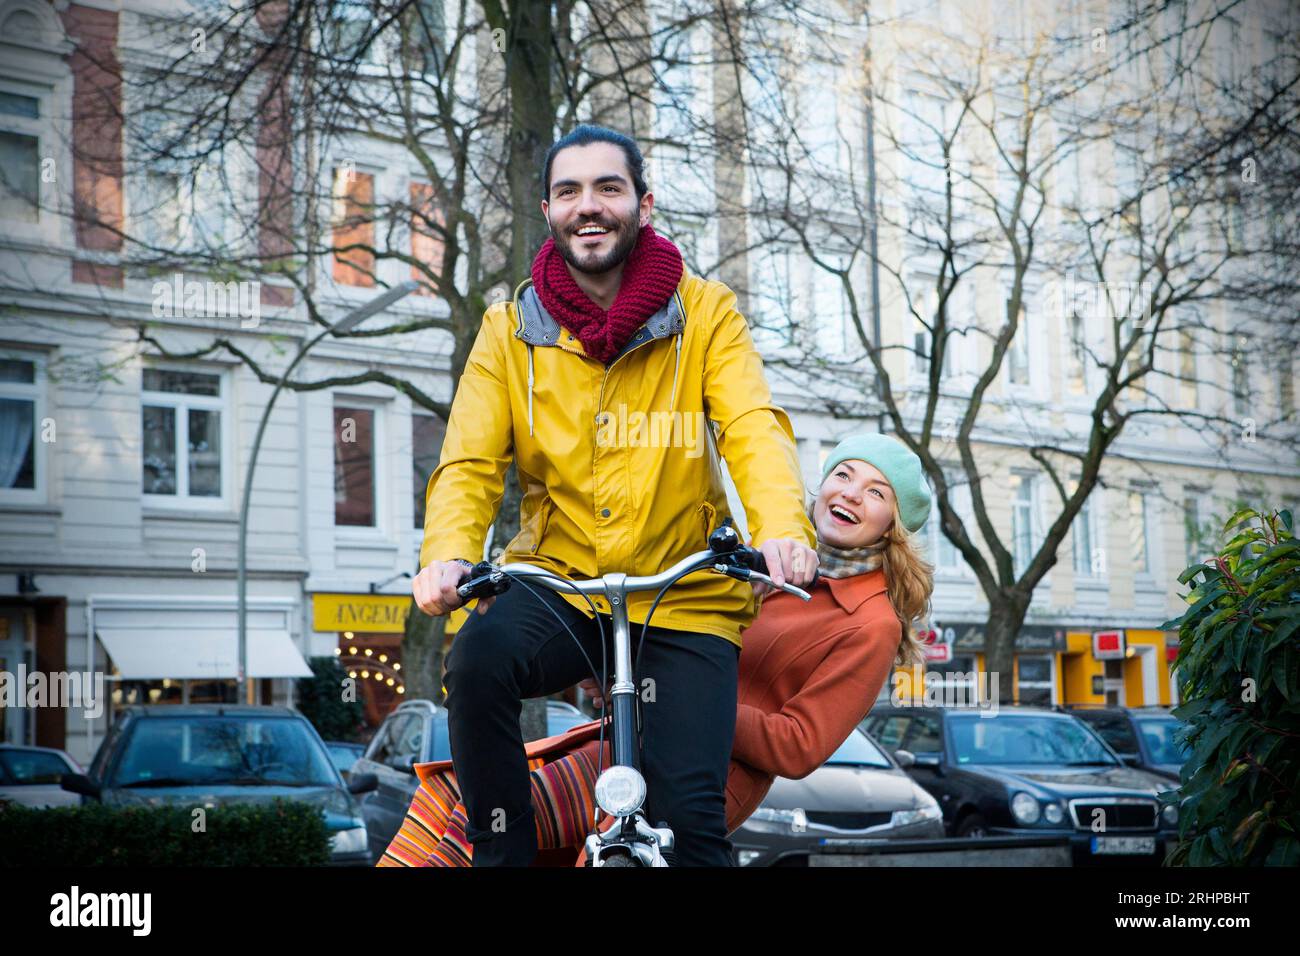 Man with woman on bicycle Stock Photo